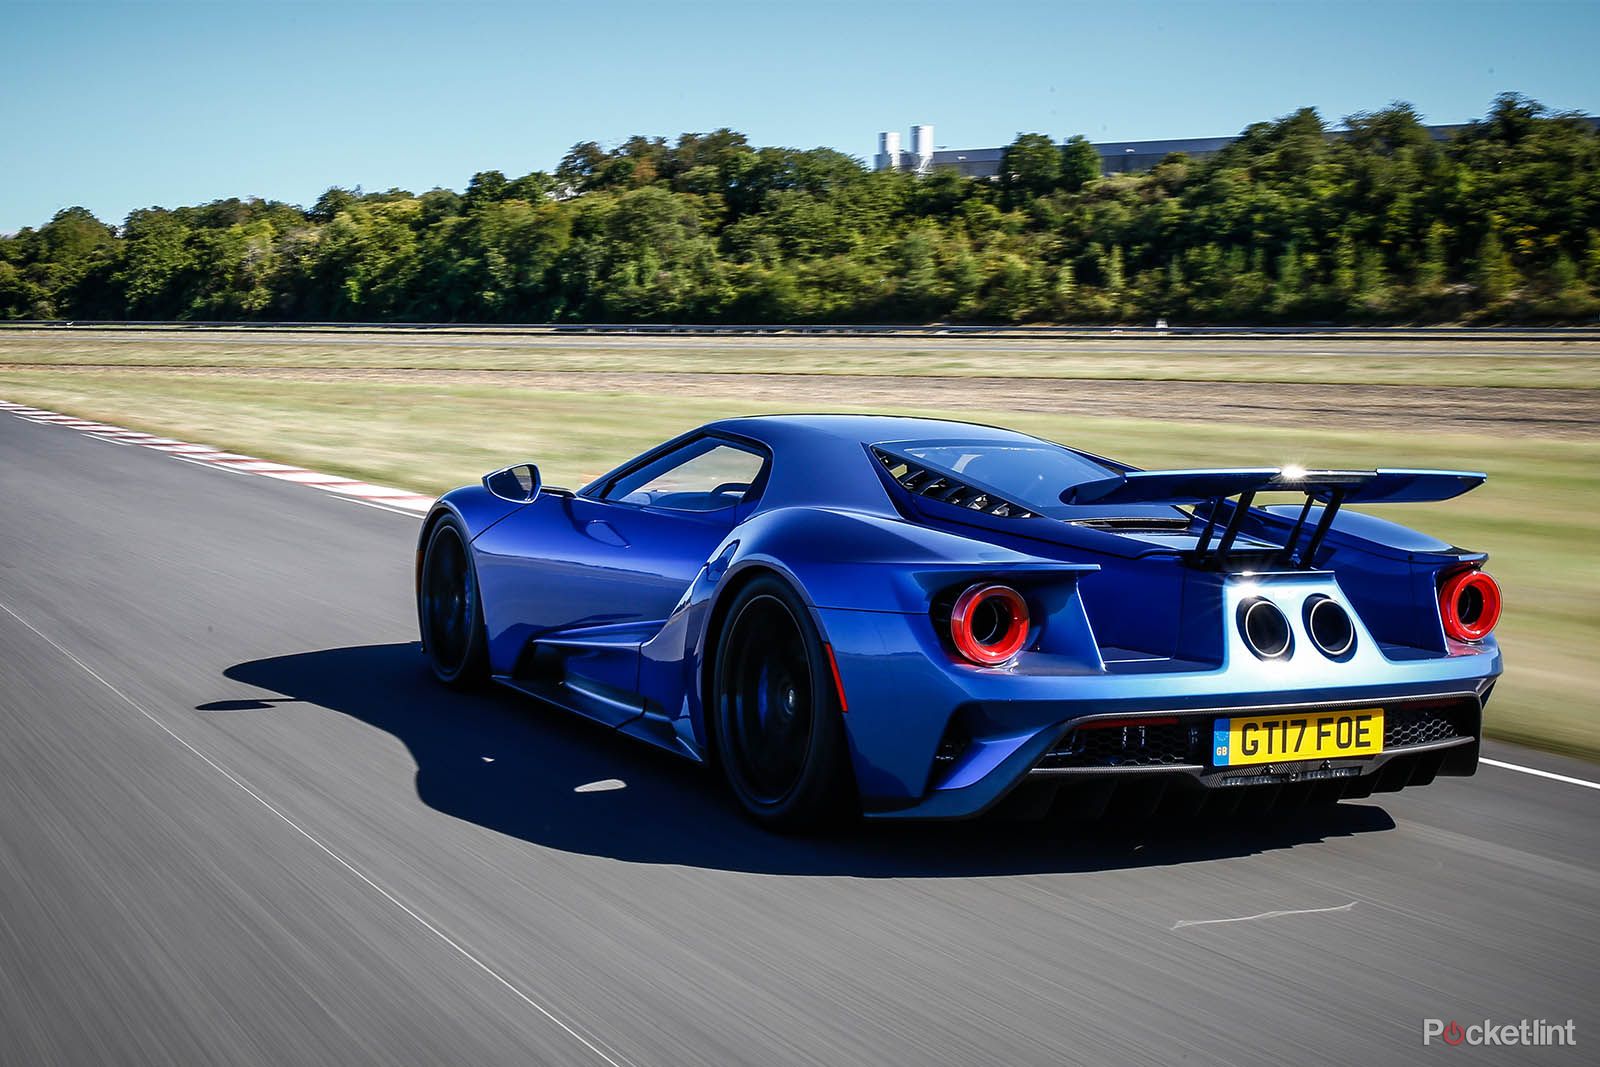 Ford GT review image 2